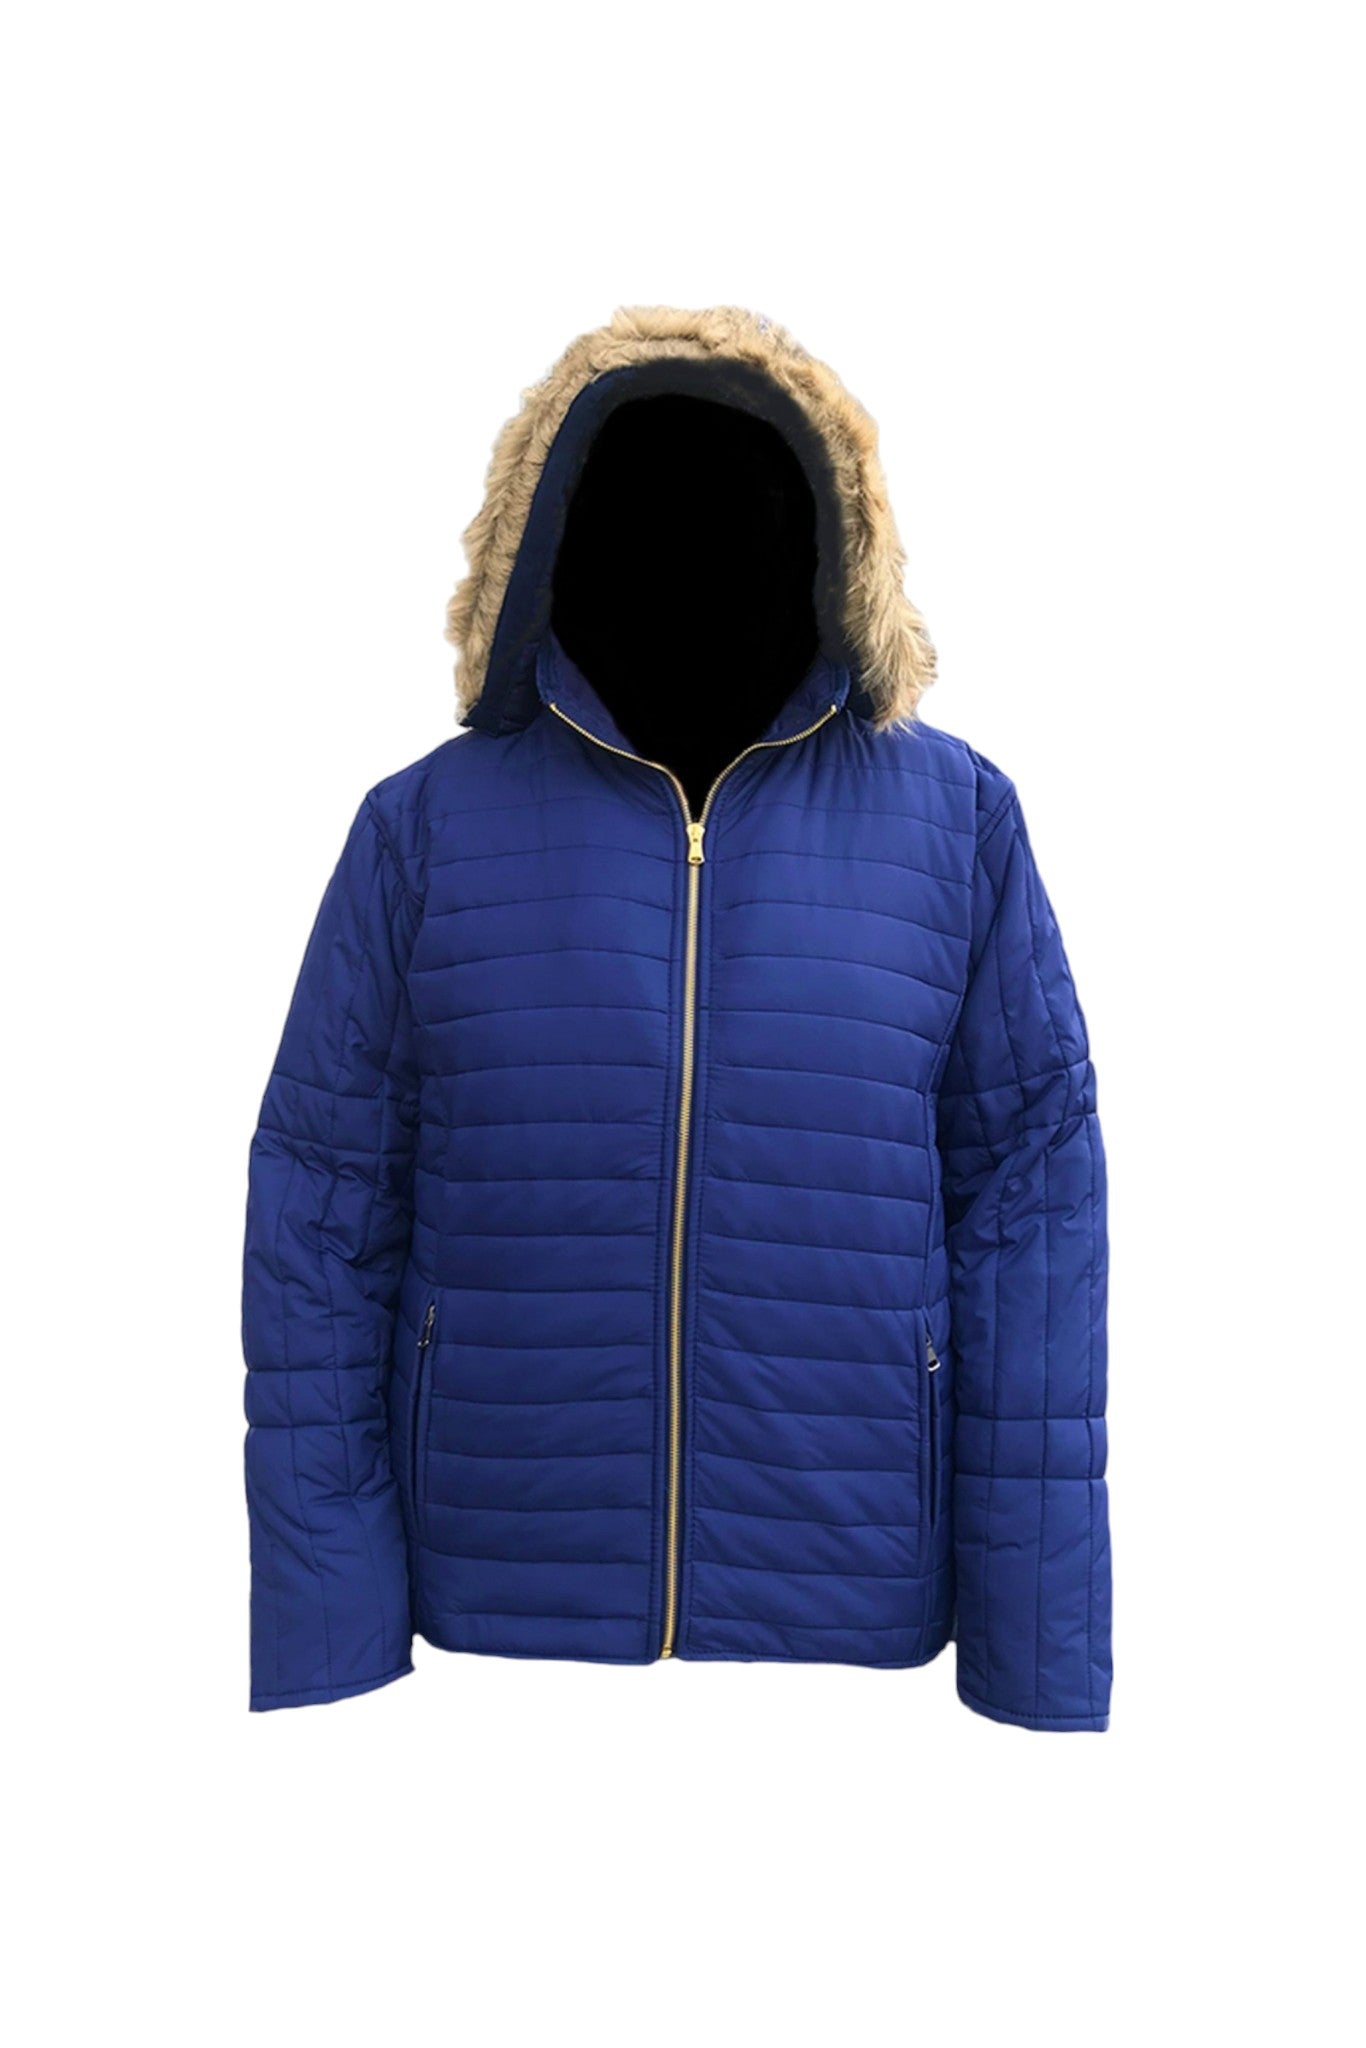 Women’s Plus Size Lightweight Bubble Jacket with Removable Oxford Fur